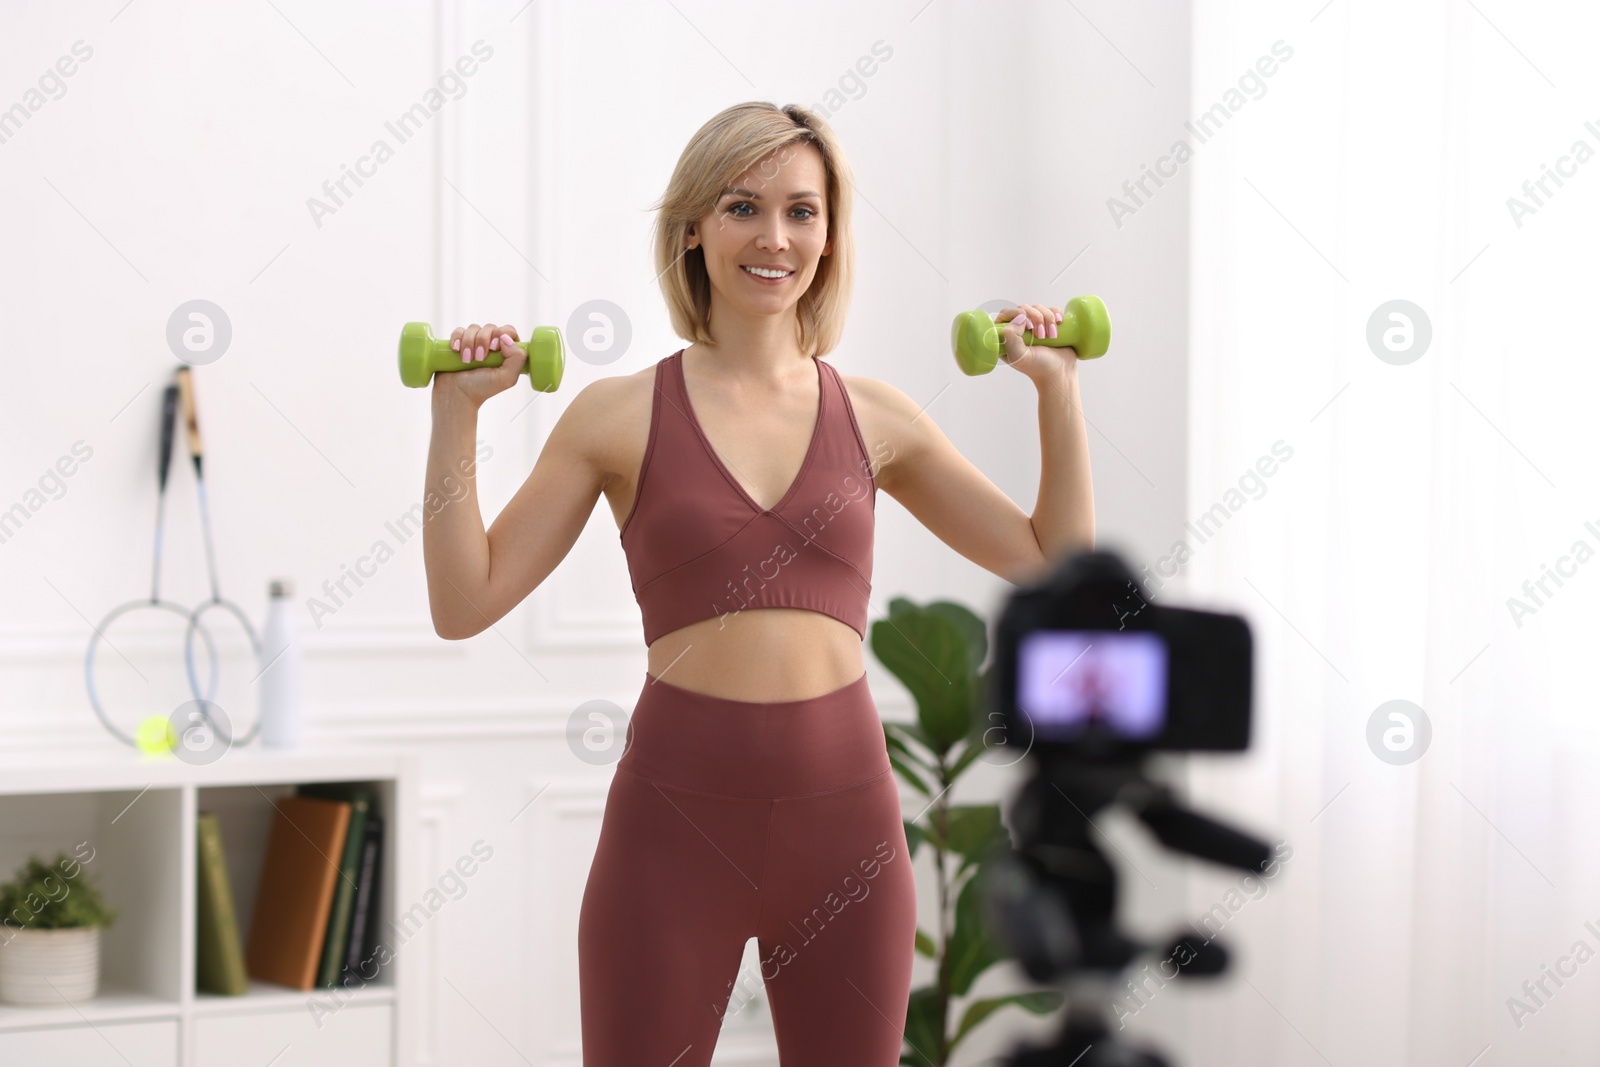 Photo of Smiling sports blogger working out with dumbbells while recording fitness lesson at home